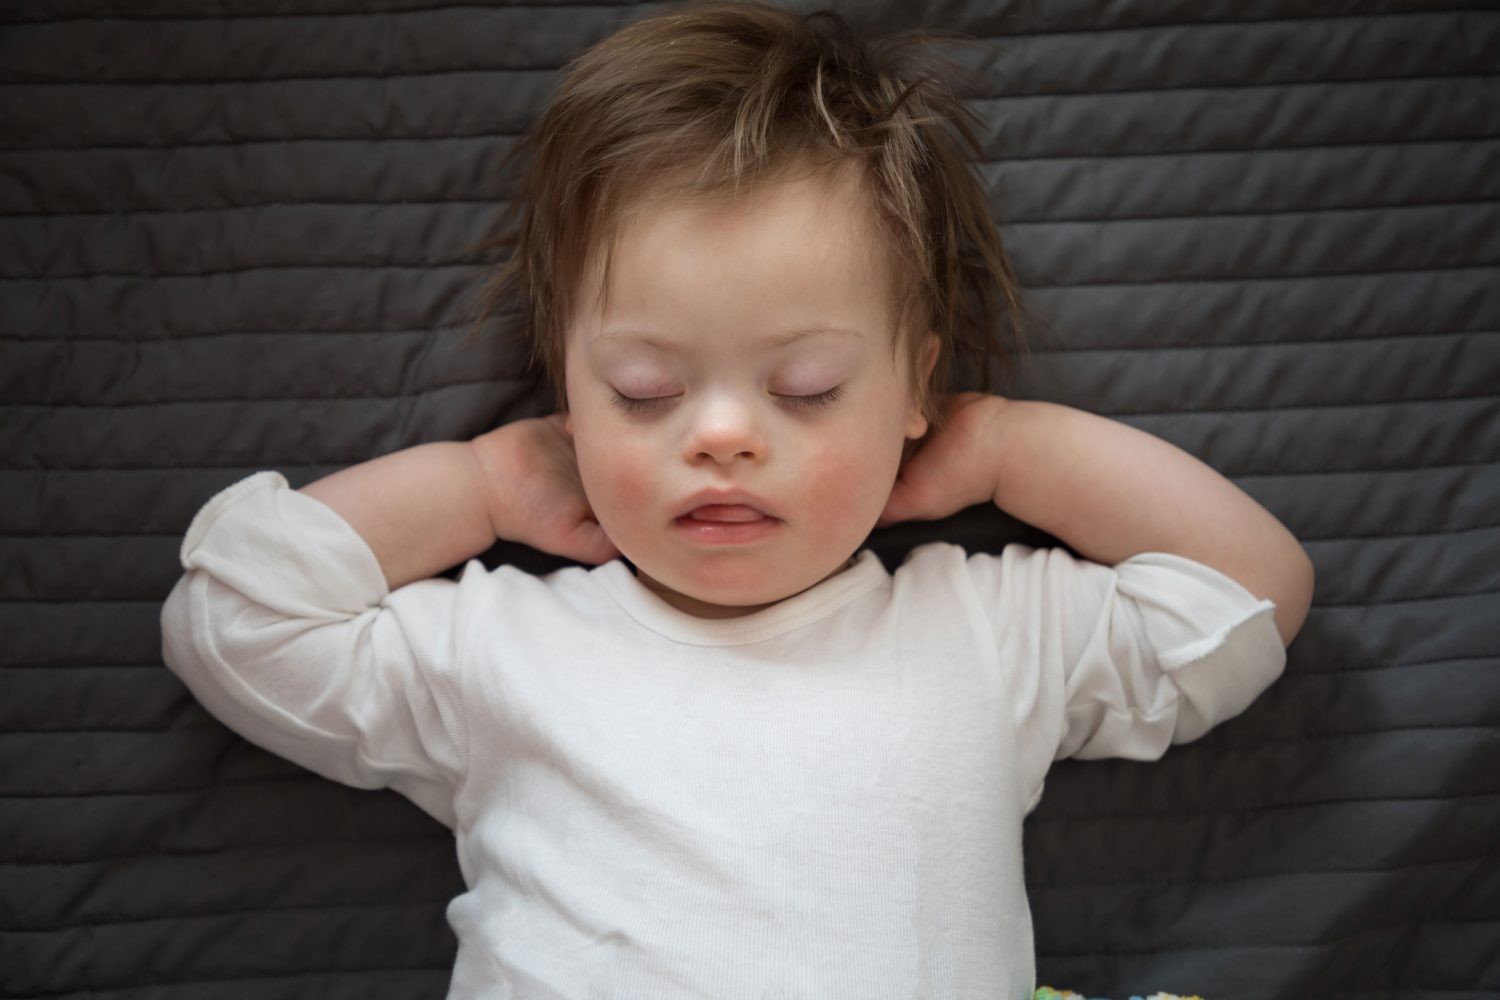 Toddler with Down syndrome sleeping on bed